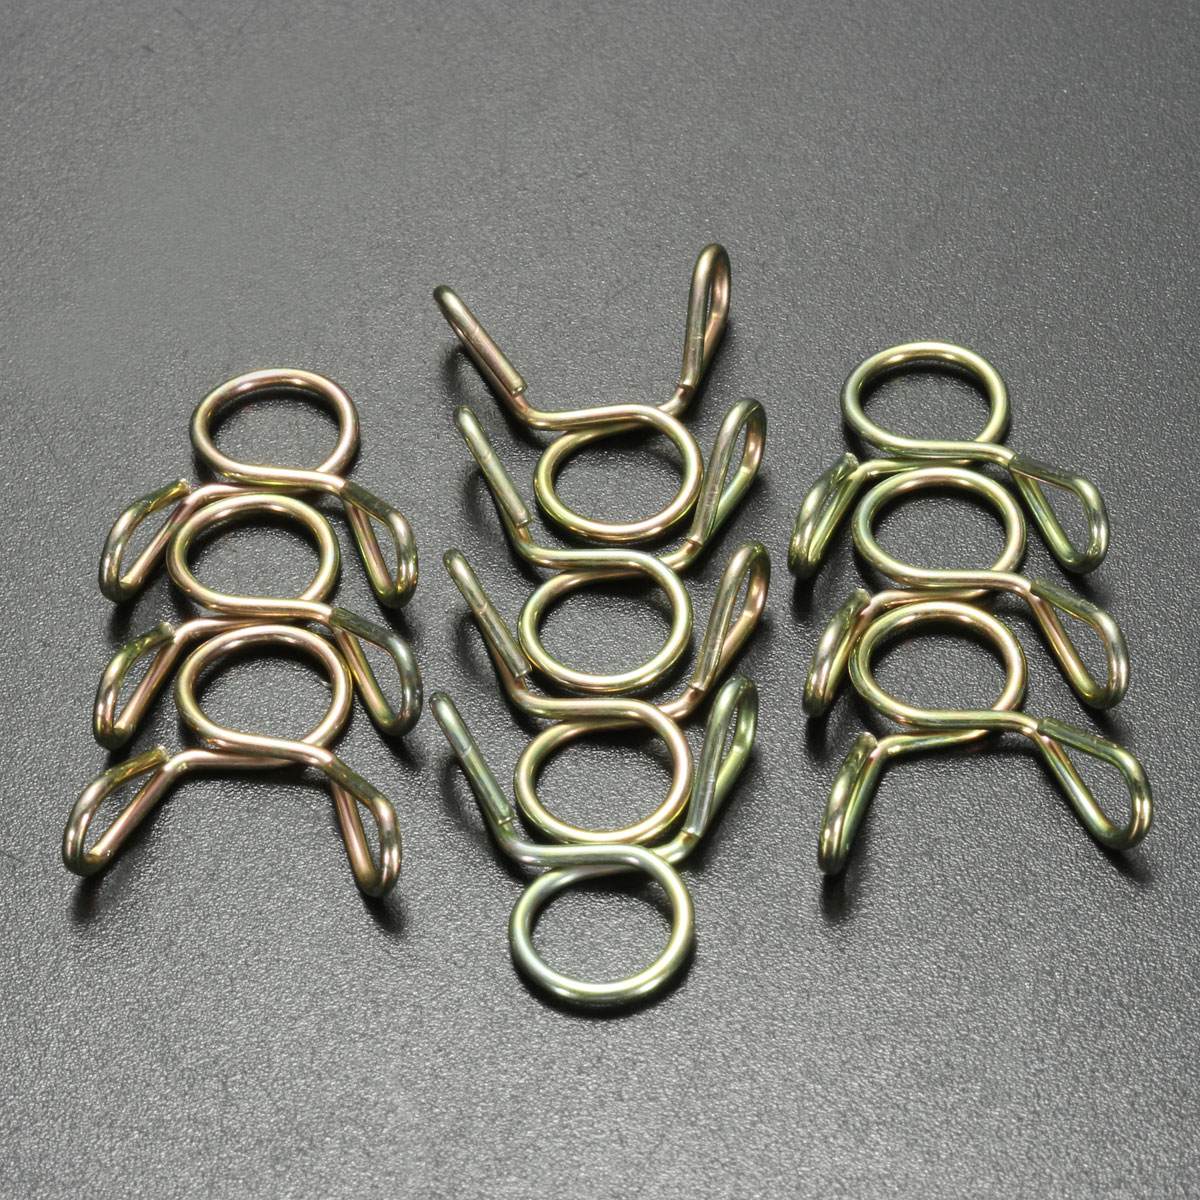 10 Pcs/Set 8mm Motorcycle Fuel Water Line Hose Tubing Spring Clips Clamps